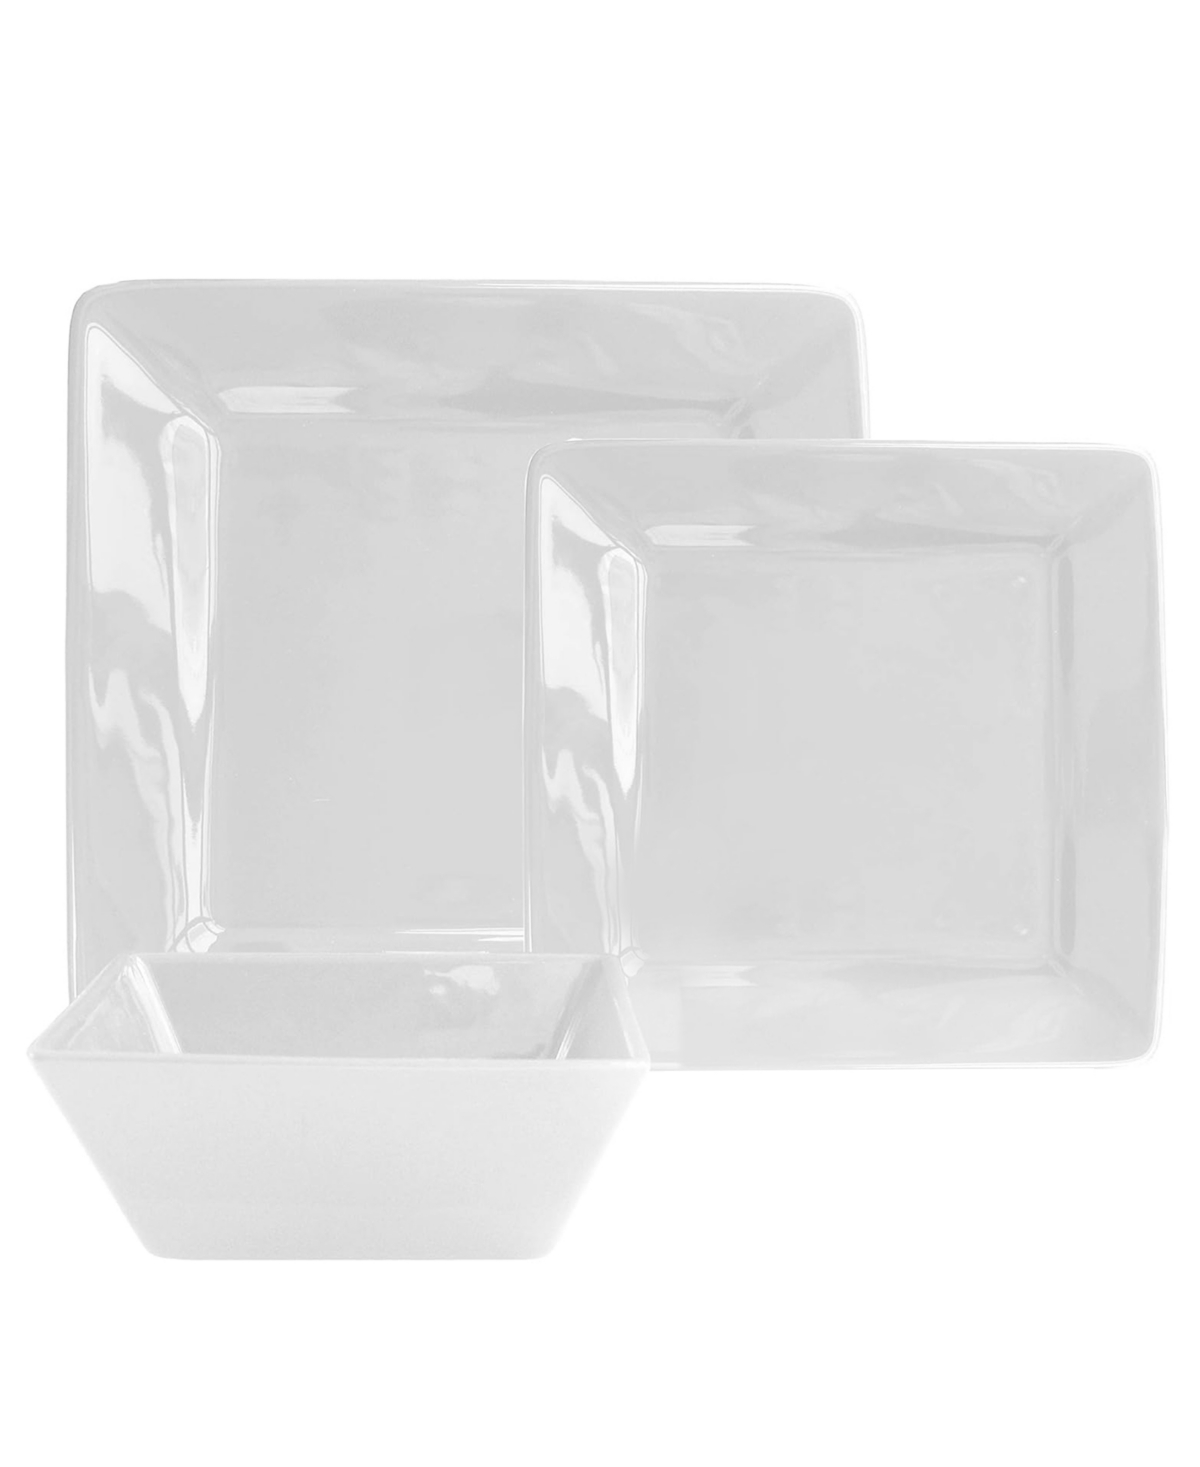 Kingsley Casual Square 12-Piece Dinnerware Set, Service for 4 - White